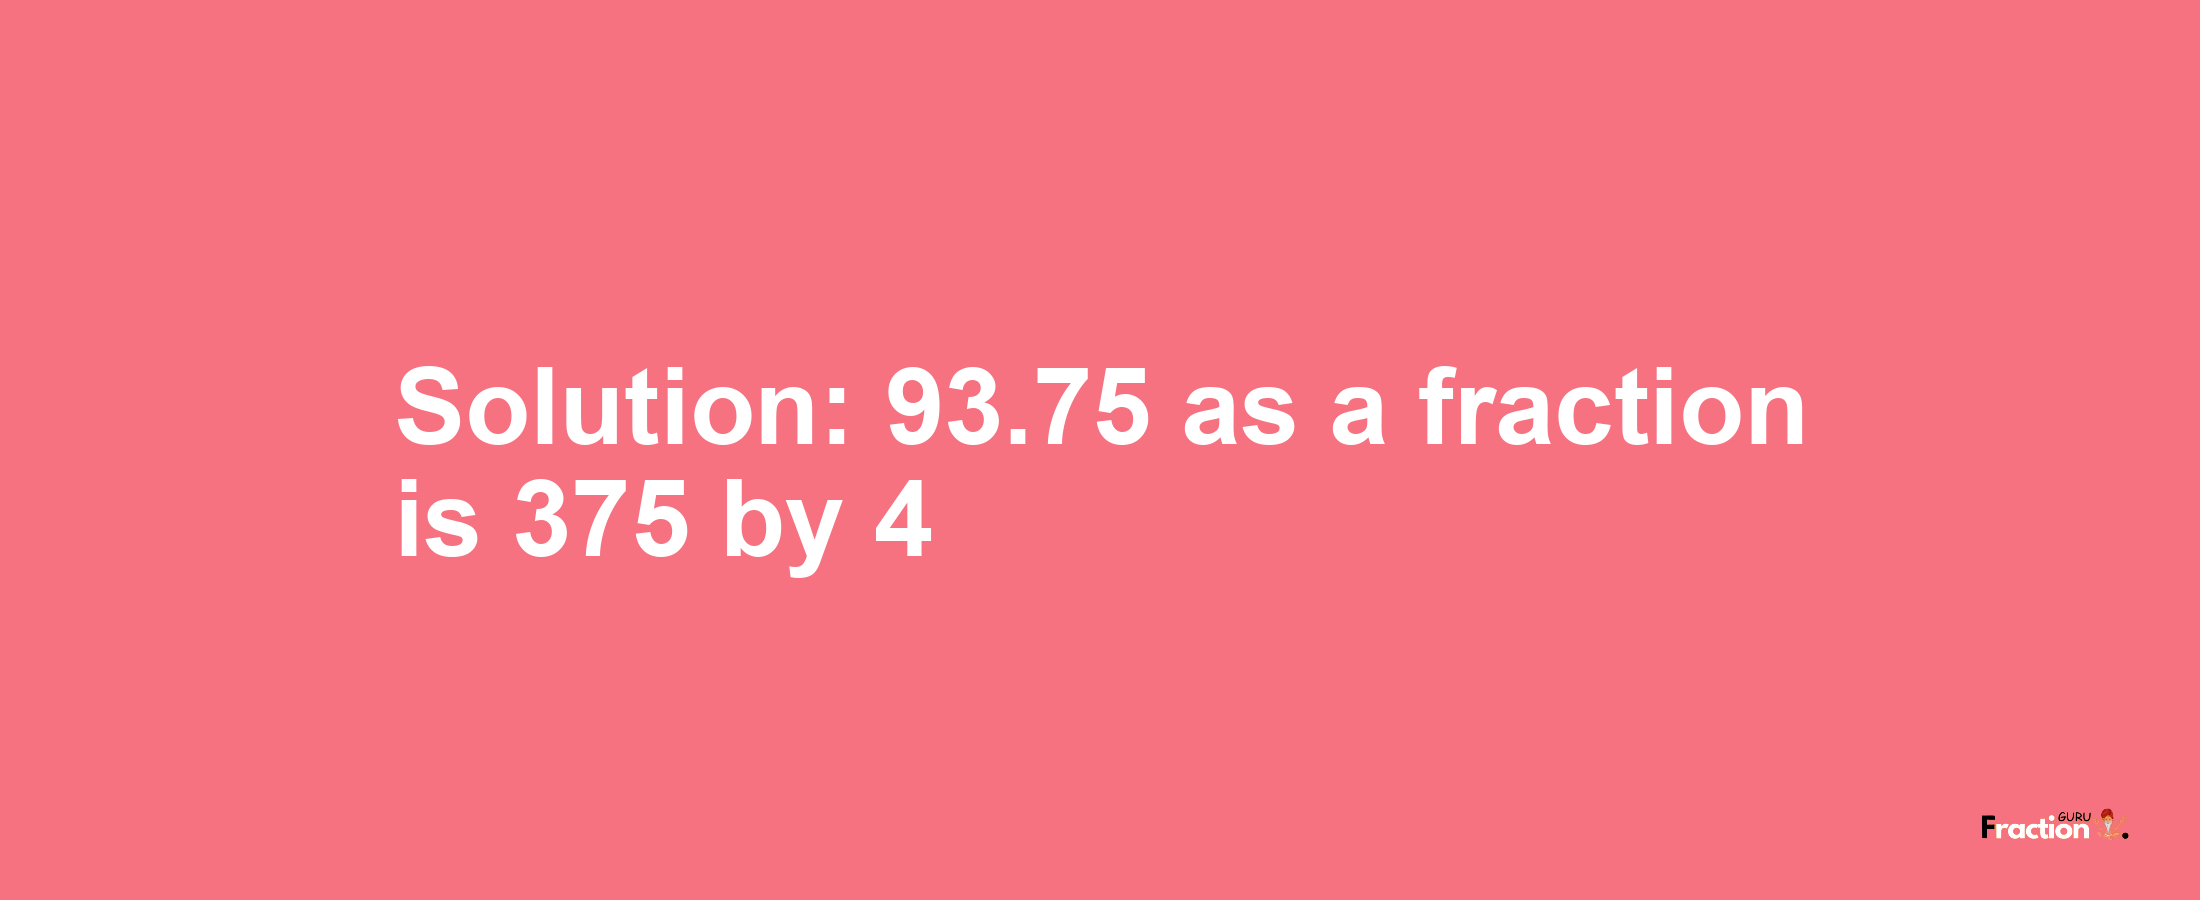 Solution:93.75 as a fraction is 375/4